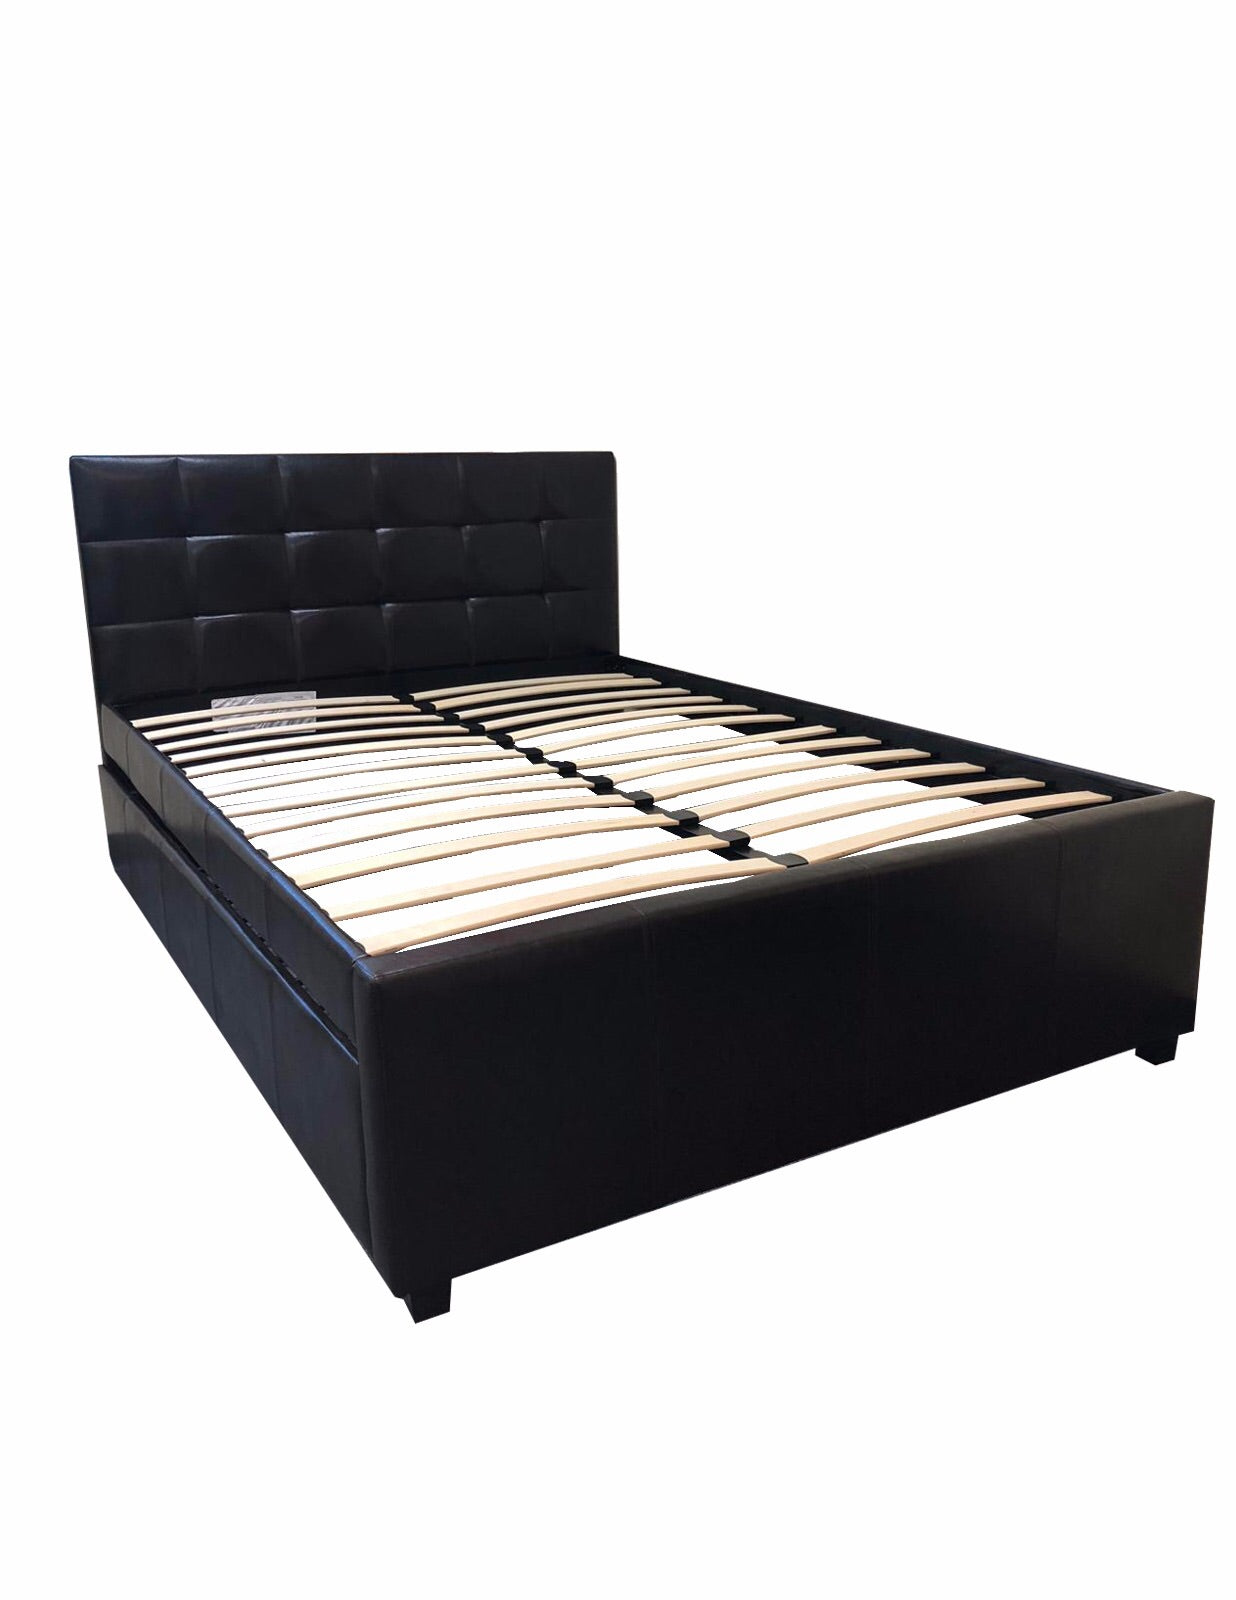 Full size Bed Frame with Twin Trundle – Arza Goods